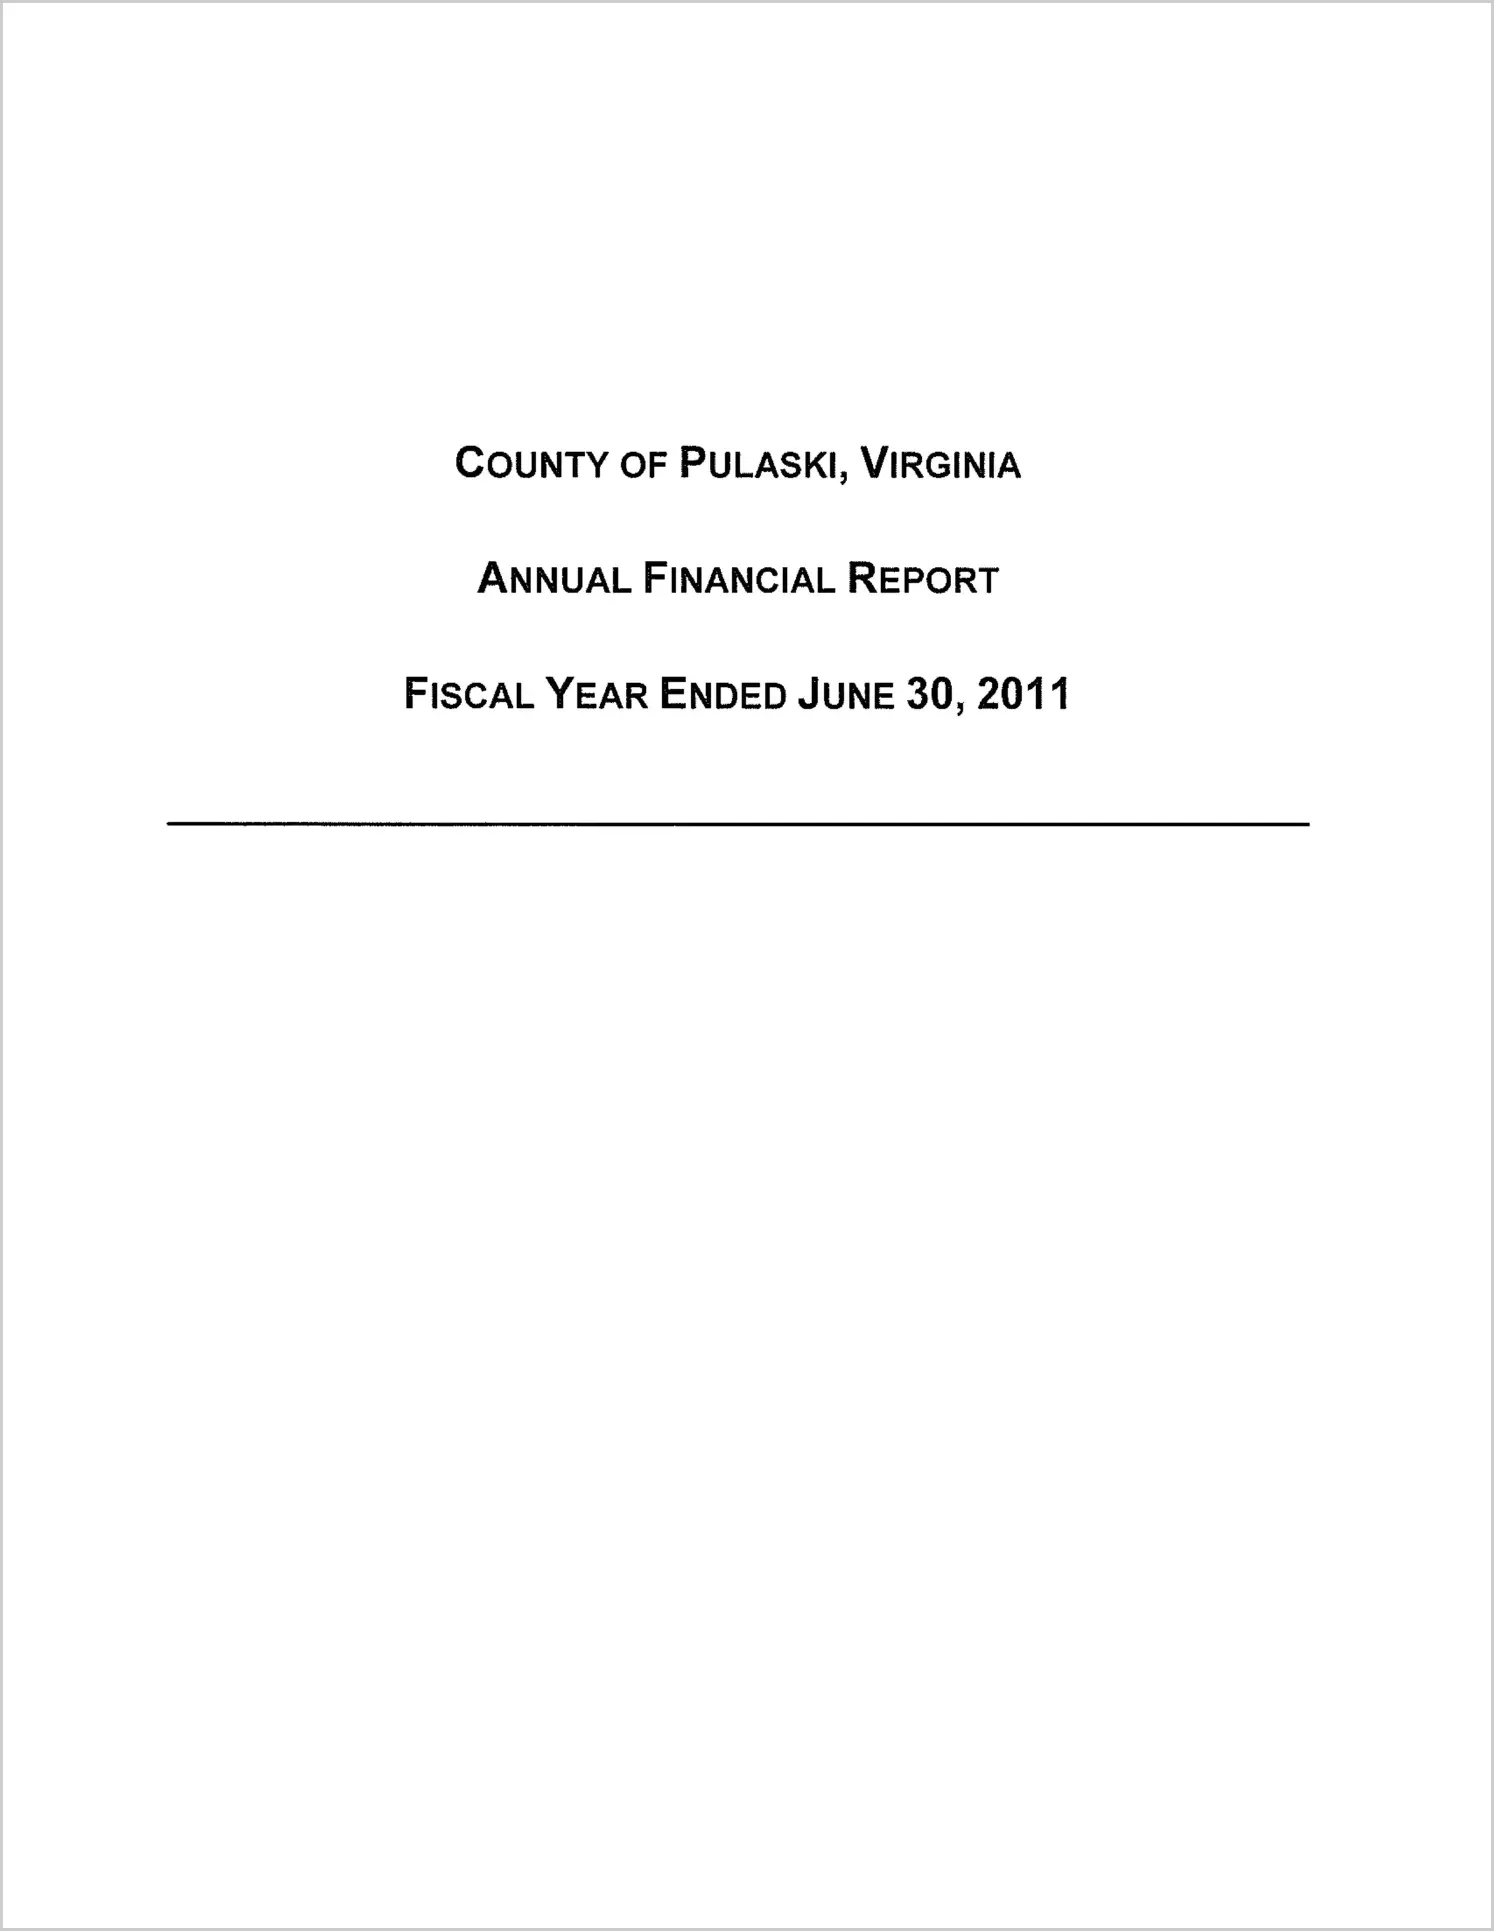 2011 Annual Financial Report for County of Pulaski